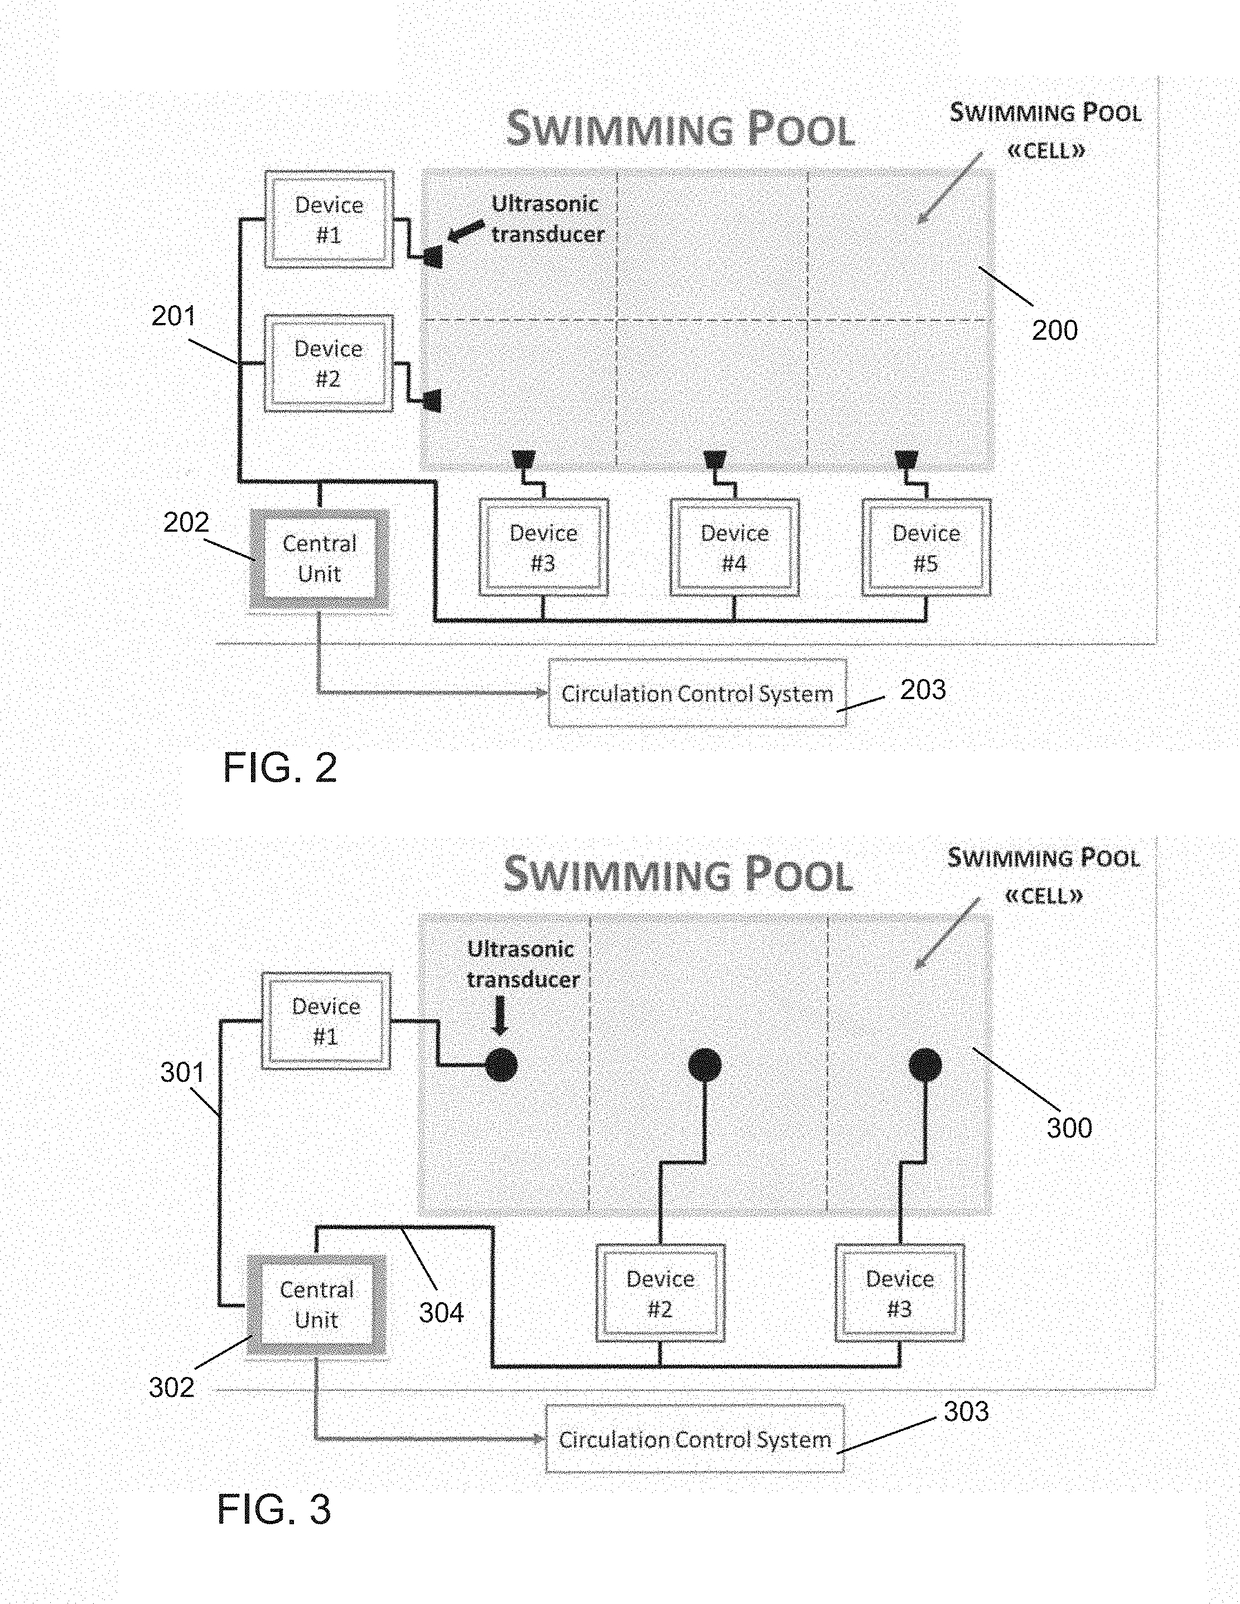 Systems for sensing pool occupants and regulating pool functions